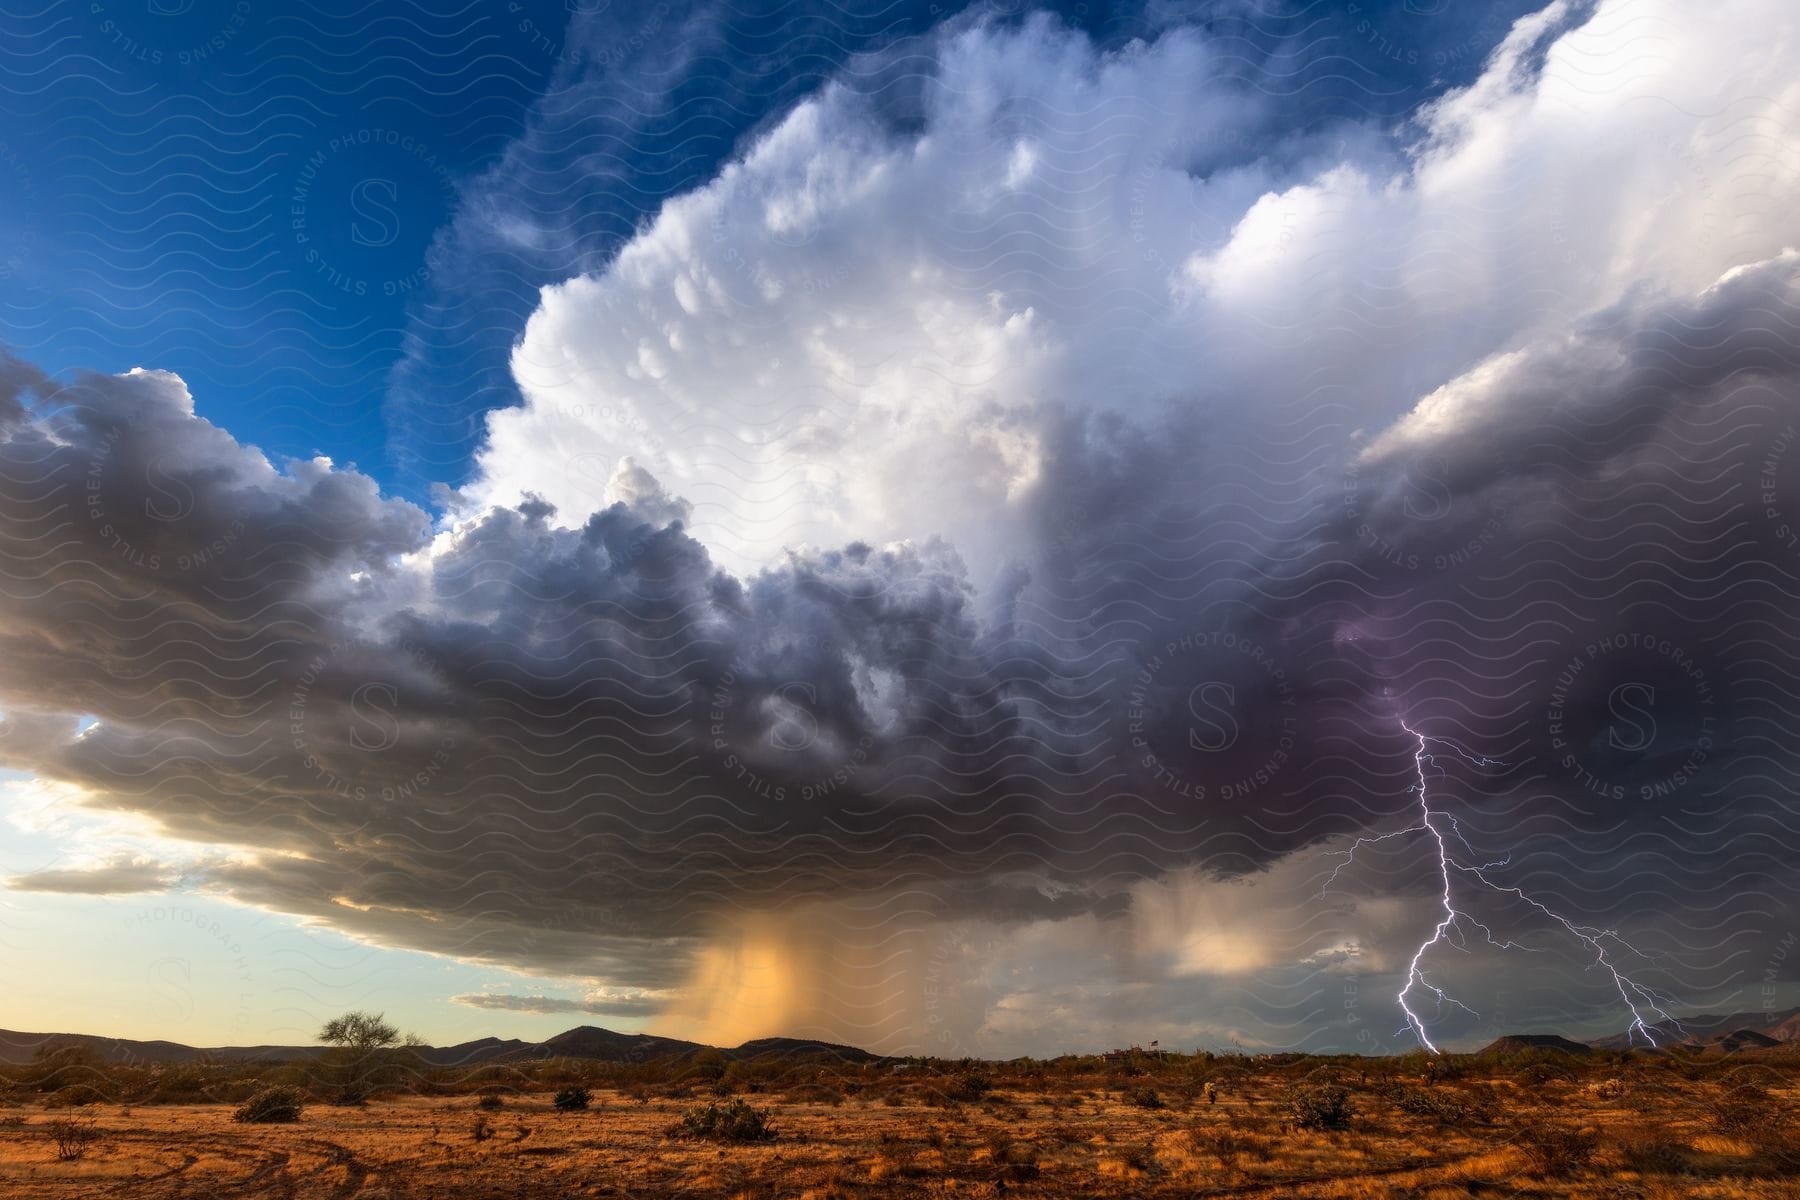 A dark supercell storm cloud pours down rain as lightning strikes near mountains in the distance